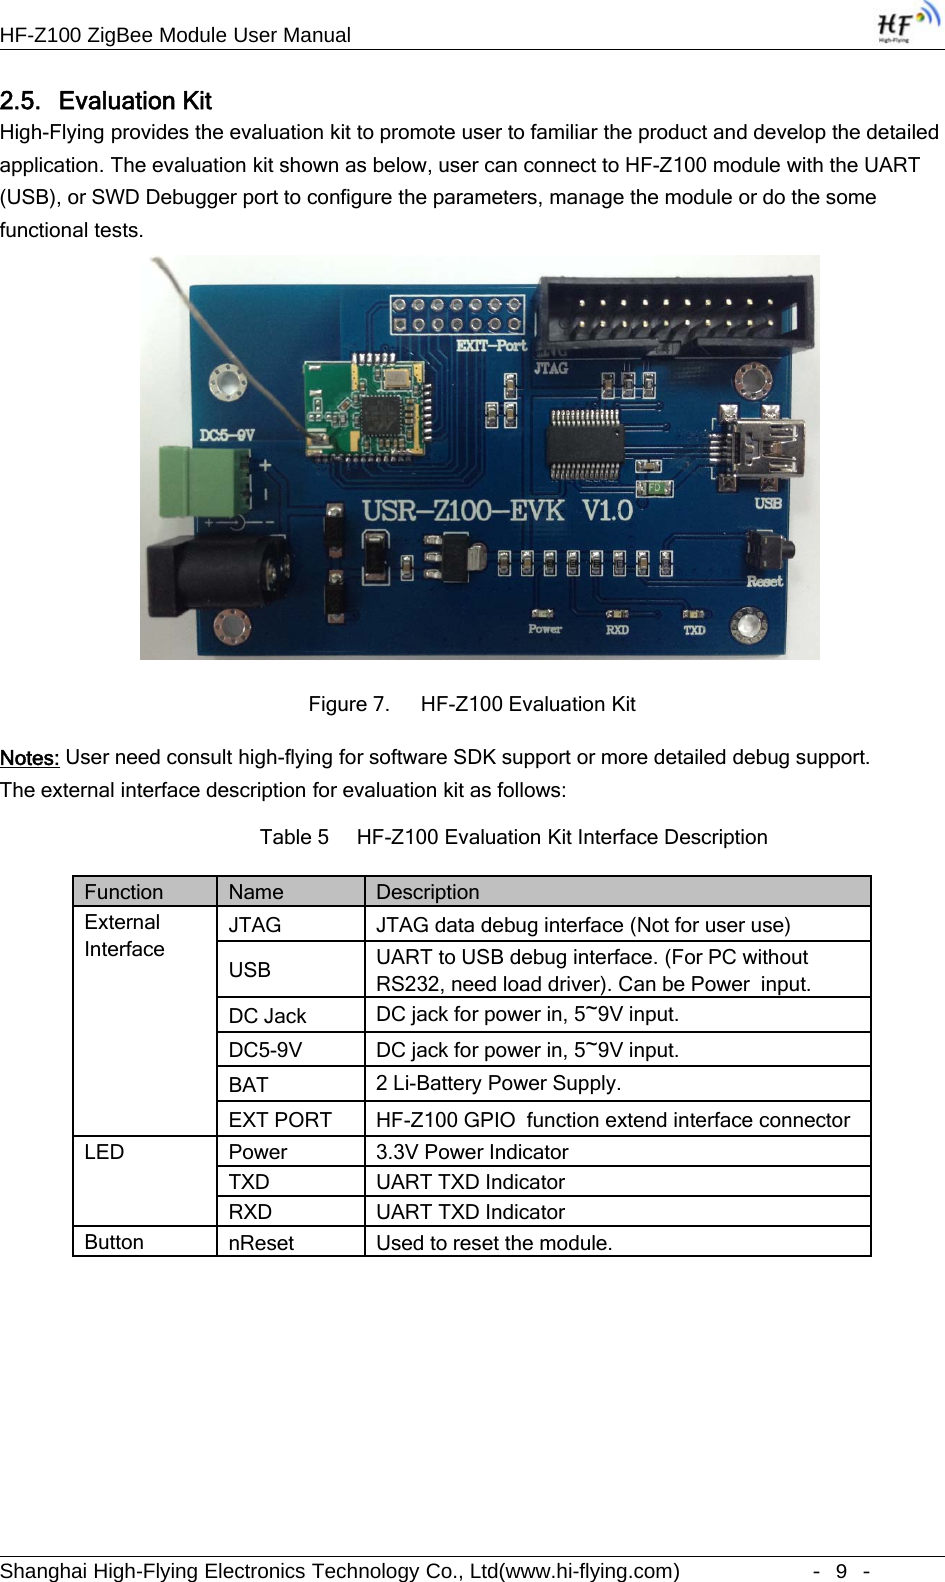 HF-Z100 ZigBee Module User ManualShanghai High-Flying Electronics Technology Co., Ltd(www.hi-flying.com) -9-2.5. Evaluation KitHigh-Flying provides the evaluation kit to promote user to familiar the product and develop the detailedapplication. The evaluation kit shown as below, user can connect to HF-Z100 module with the UART(USB), or SWD Debugger port to configure the parameters, manage the module or do the somefunctional tests.Figure 7. HF-Z100 Evaluation KitNotes: User need consult high-flying for software SDK support or more detailed debug support.The external interface description for evaluation kit as follows:Table 5 HF-Z100 Evaluation Kit Interface DescriptionFunction Name DescriptionExternalInterfaceJTAG JTAG data debug interface (Not for user use)USB UART to USB debug interface. (For PC withoutRS232, need load driver). Can be Power input.DC Jack DC jack for power in, 5~9V input.DC5-9V DC jack for power in, 5~9V input.BAT 2 Li-Battery Power Supply.EXT PORT HF-Z100 GPIO function extend interface connectorLED Power 3.3V Power IndicatorTXD UART TXD IndicatorRXD UART TXD IndicatorButton nReset Used to reset the module.